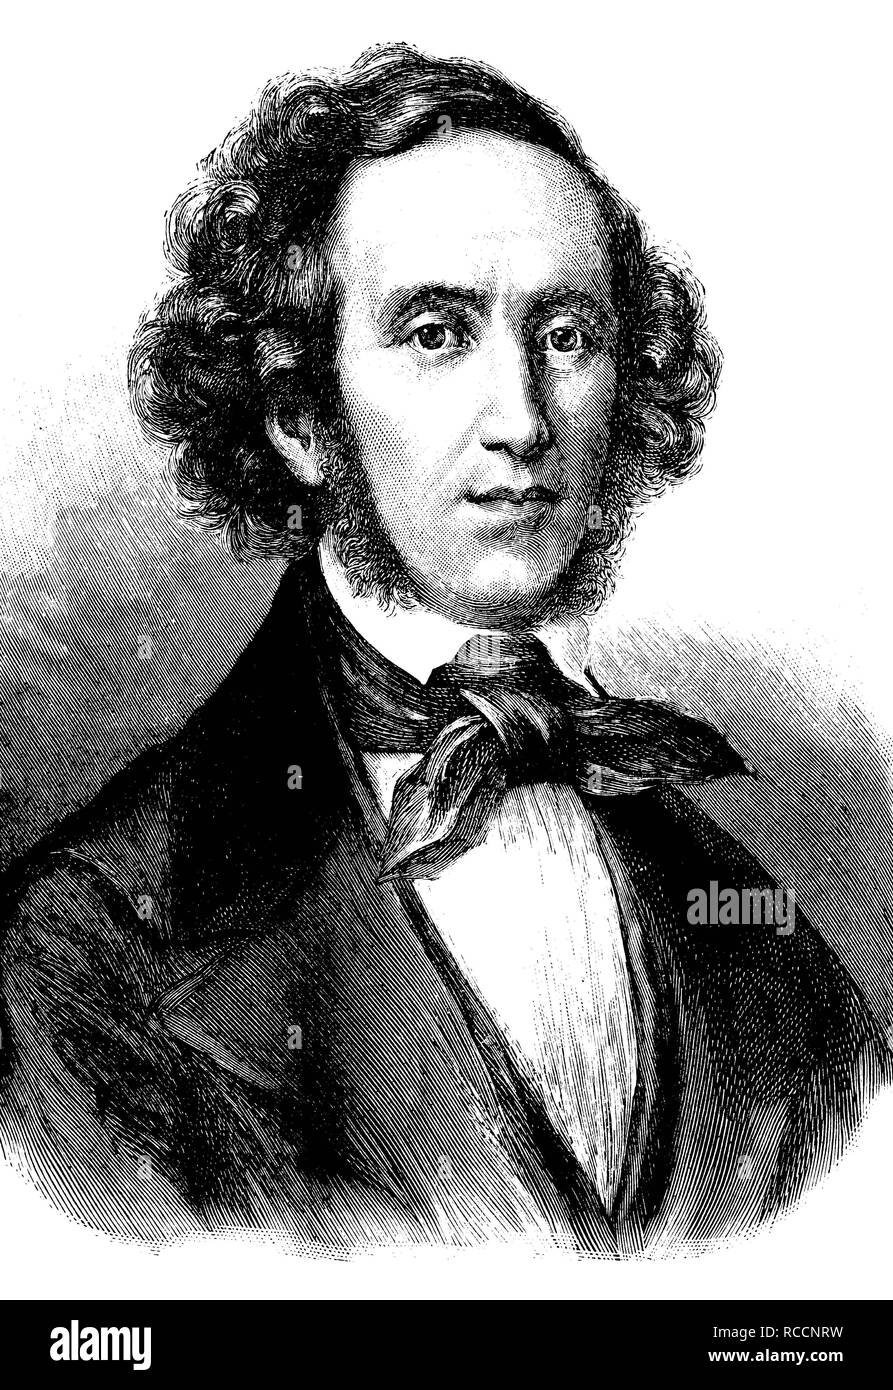 Jakob Ludwig Felix Mendelssohn Bartholdy, 1809 - 1847, a German composer, pianist and organist, he is considered one of the Stock Photo